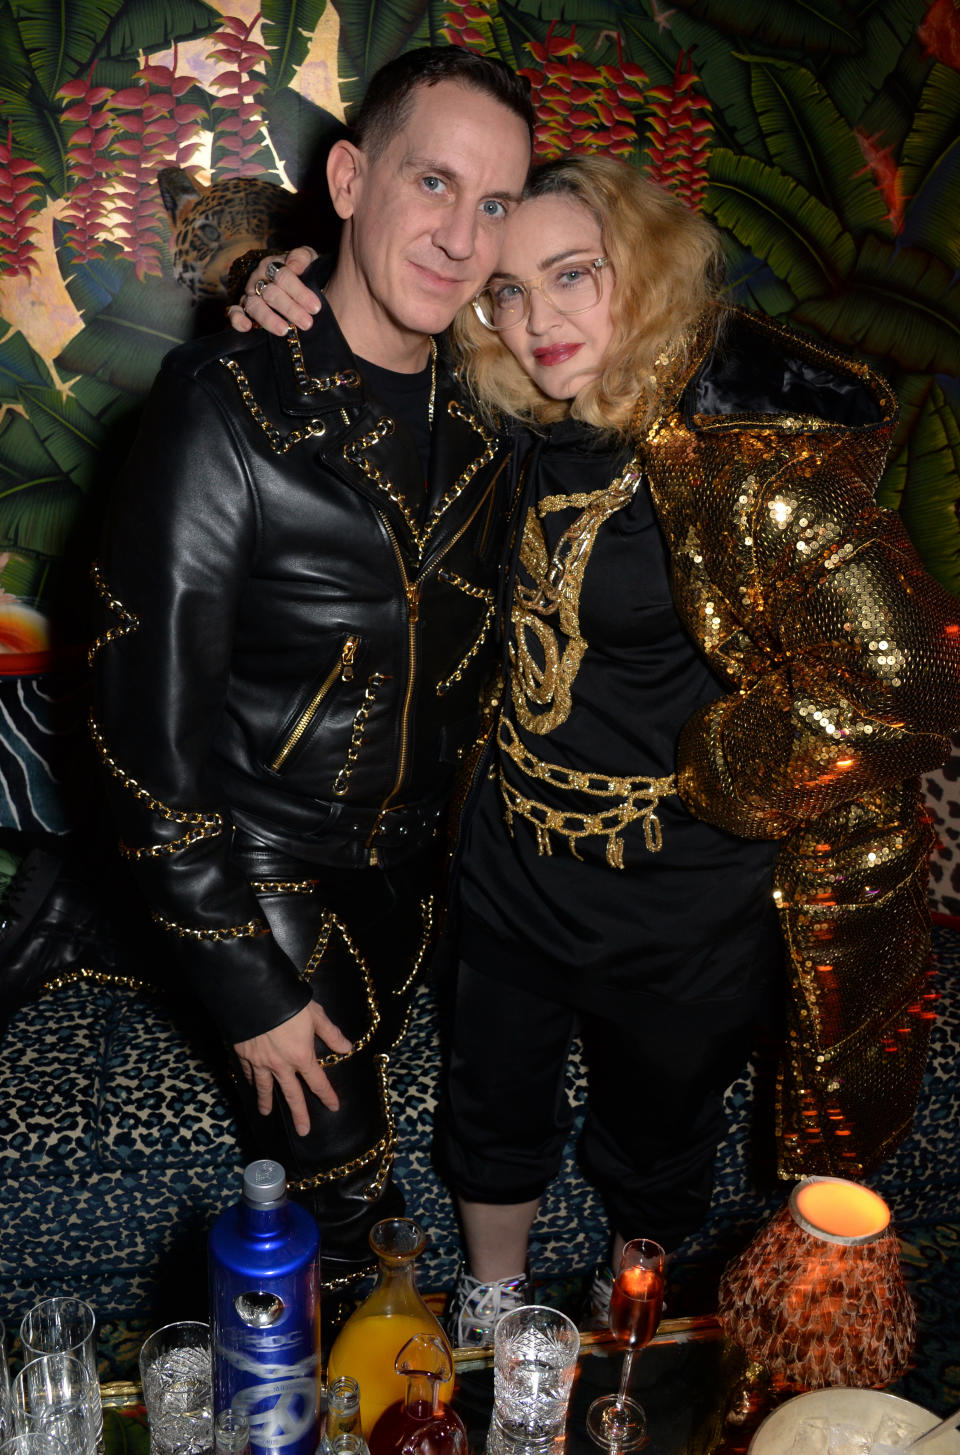 <p>LONDON, ENGLAND – NOVEMBER 06: Jeremy Scott and Madonna attend the Moschino [TV] H&M London Launch Party hosted by Jeremy Scott at Annabels on November 6, 2018 in London, England. (Photo by David M. Benett/Dave Benett/Getty Images for H&M )</p>